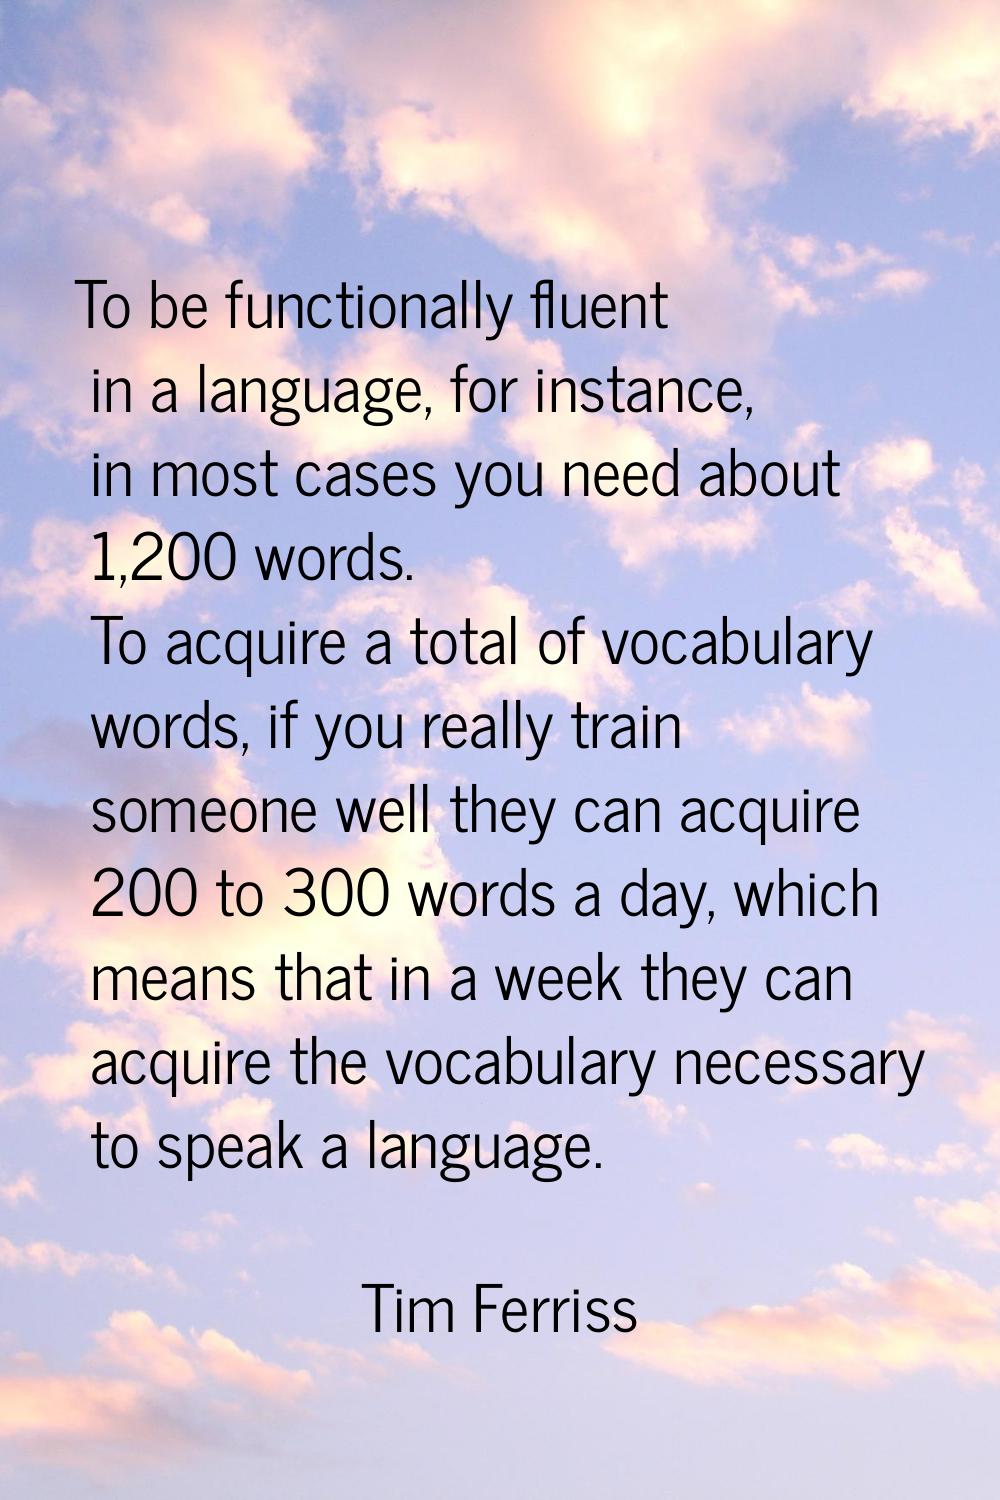 To be functionally fluent in a language, for instance, in most cases you need about 1,200 words. To